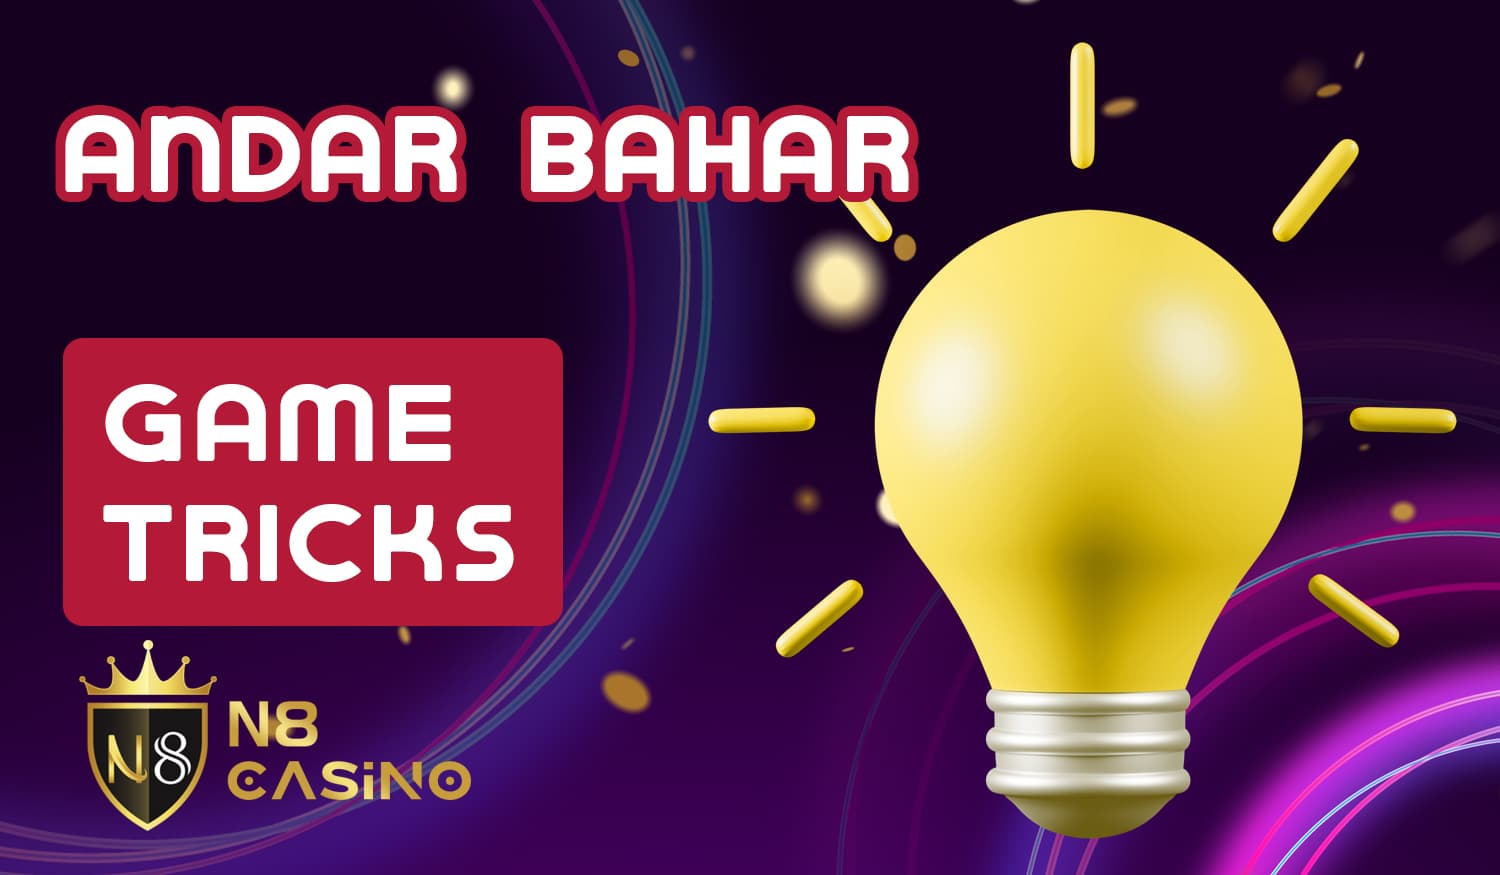 List of useful tips for successful playing Andar Bahar at N8 Casino